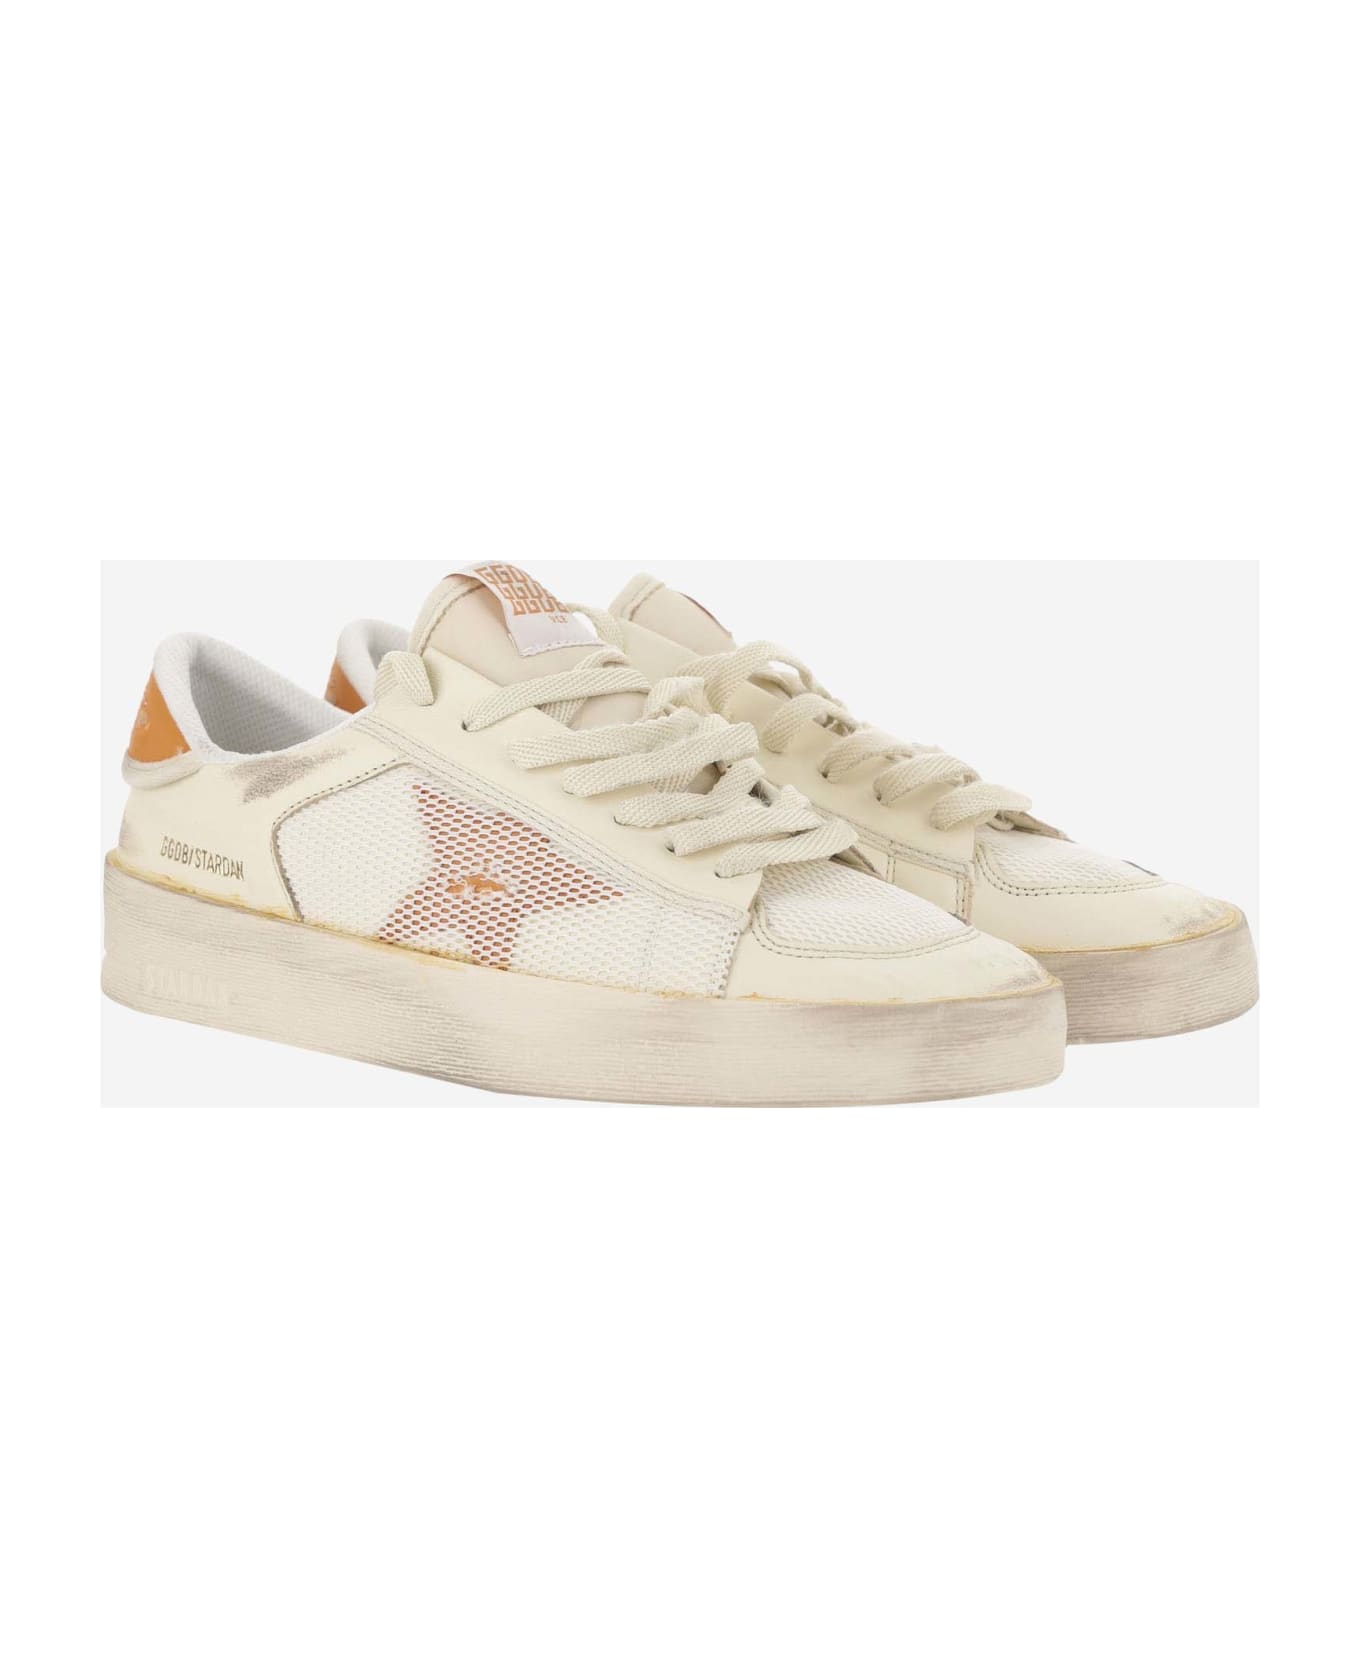 Golden Goose Stardan Sneakers With Distressed Effect - WHITE-ORANGE スニーカー